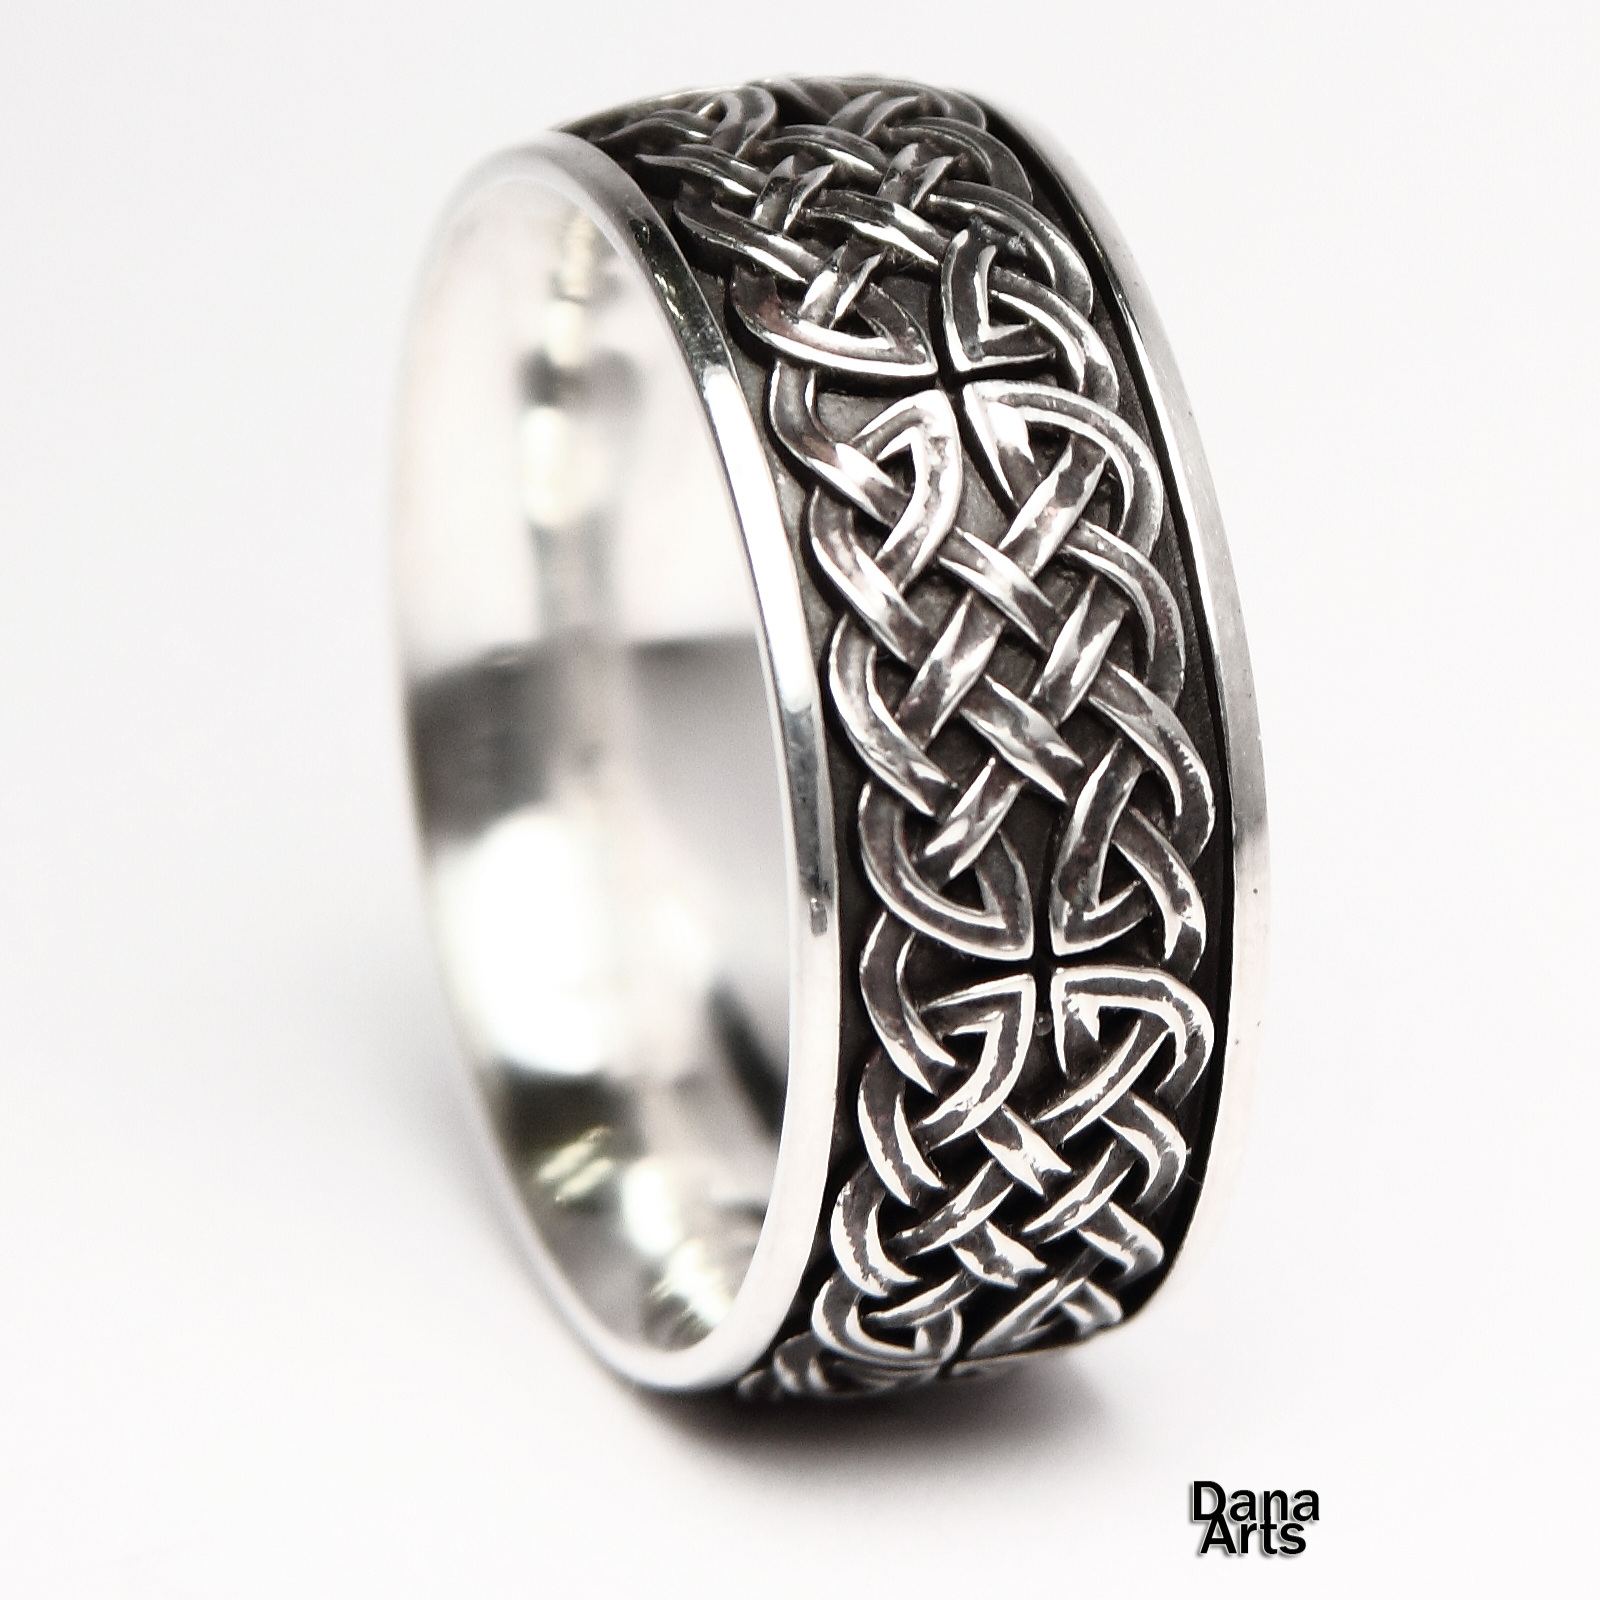 Details about   HANDCRAFTED SOLID STERLING SILVER 40mm.CELTIC DESIGN RING UK.sizes N & R  £39.95 